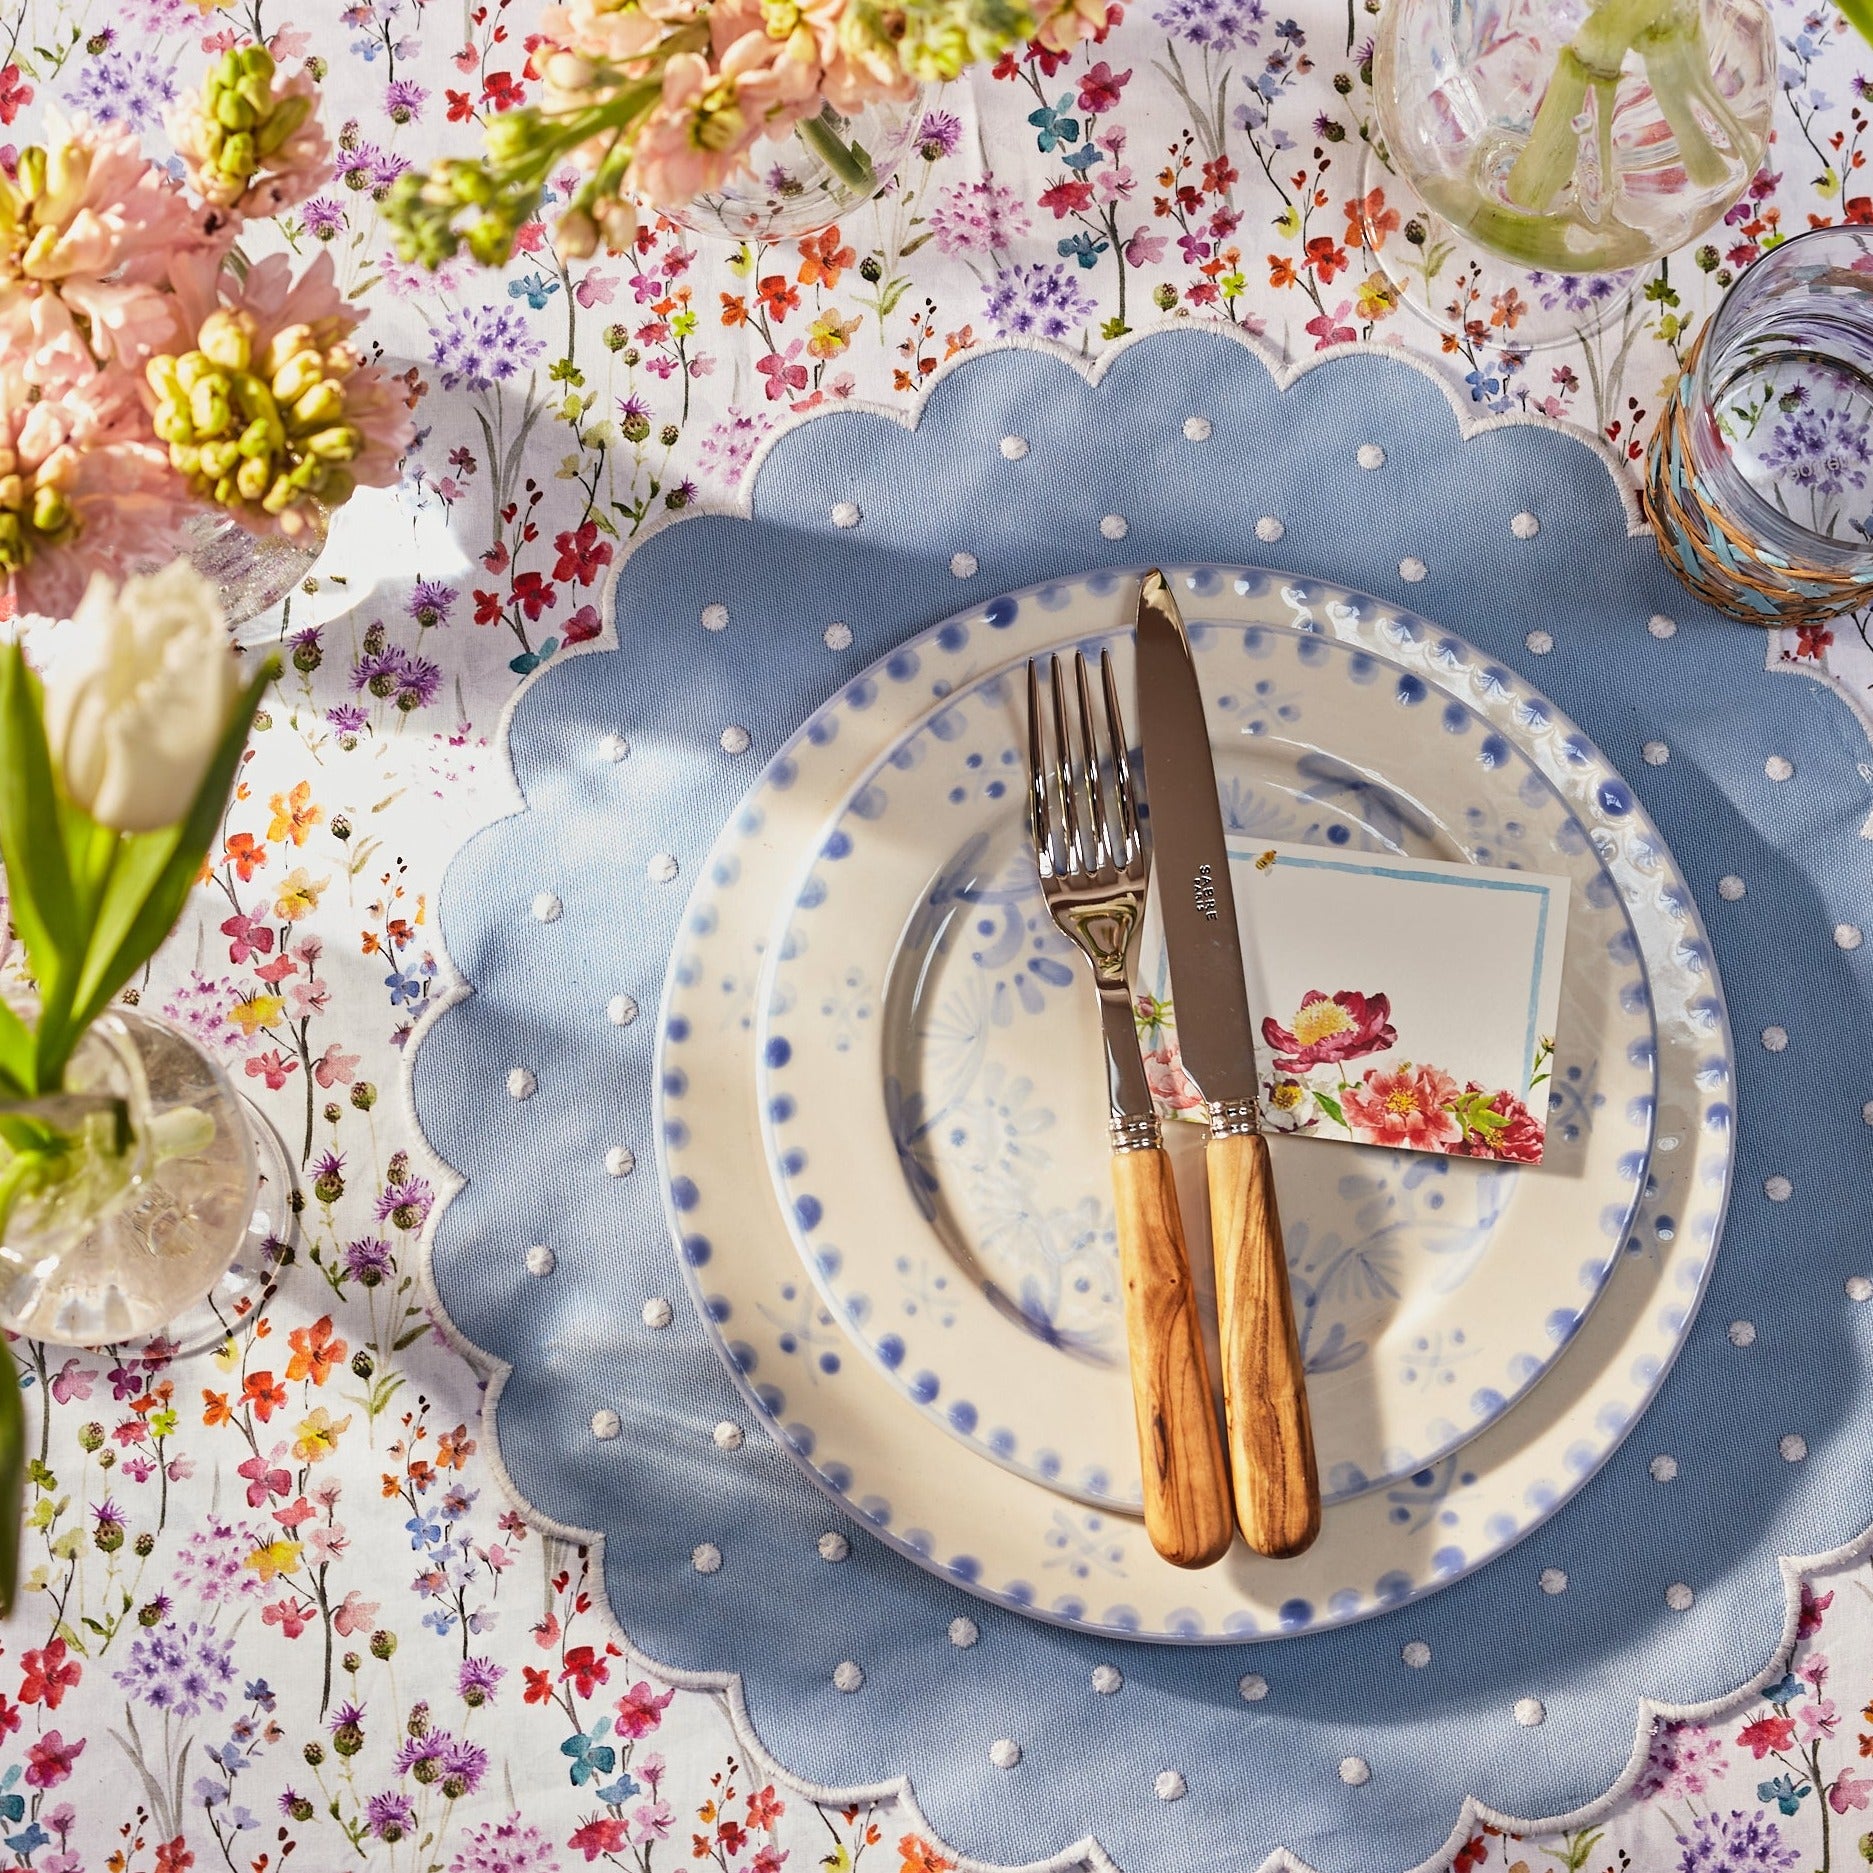 Daisy Blue Placemat (set of 4)